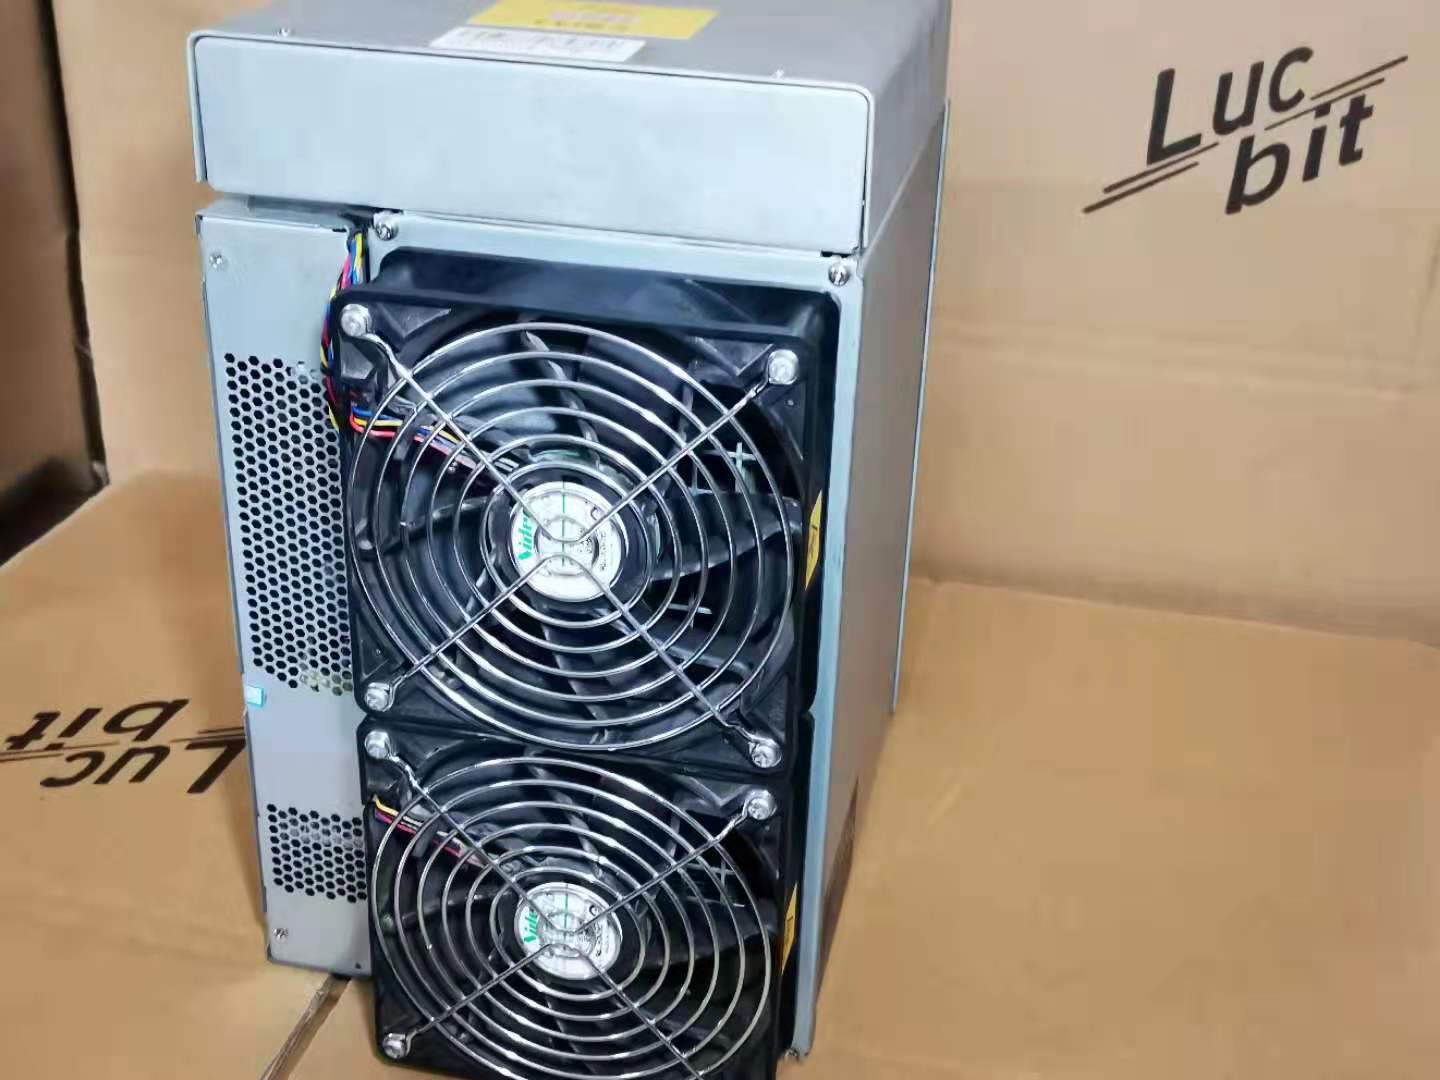 LUCBIT Antminer S17 56TH/S & S17Pro 53TH/S (Used)